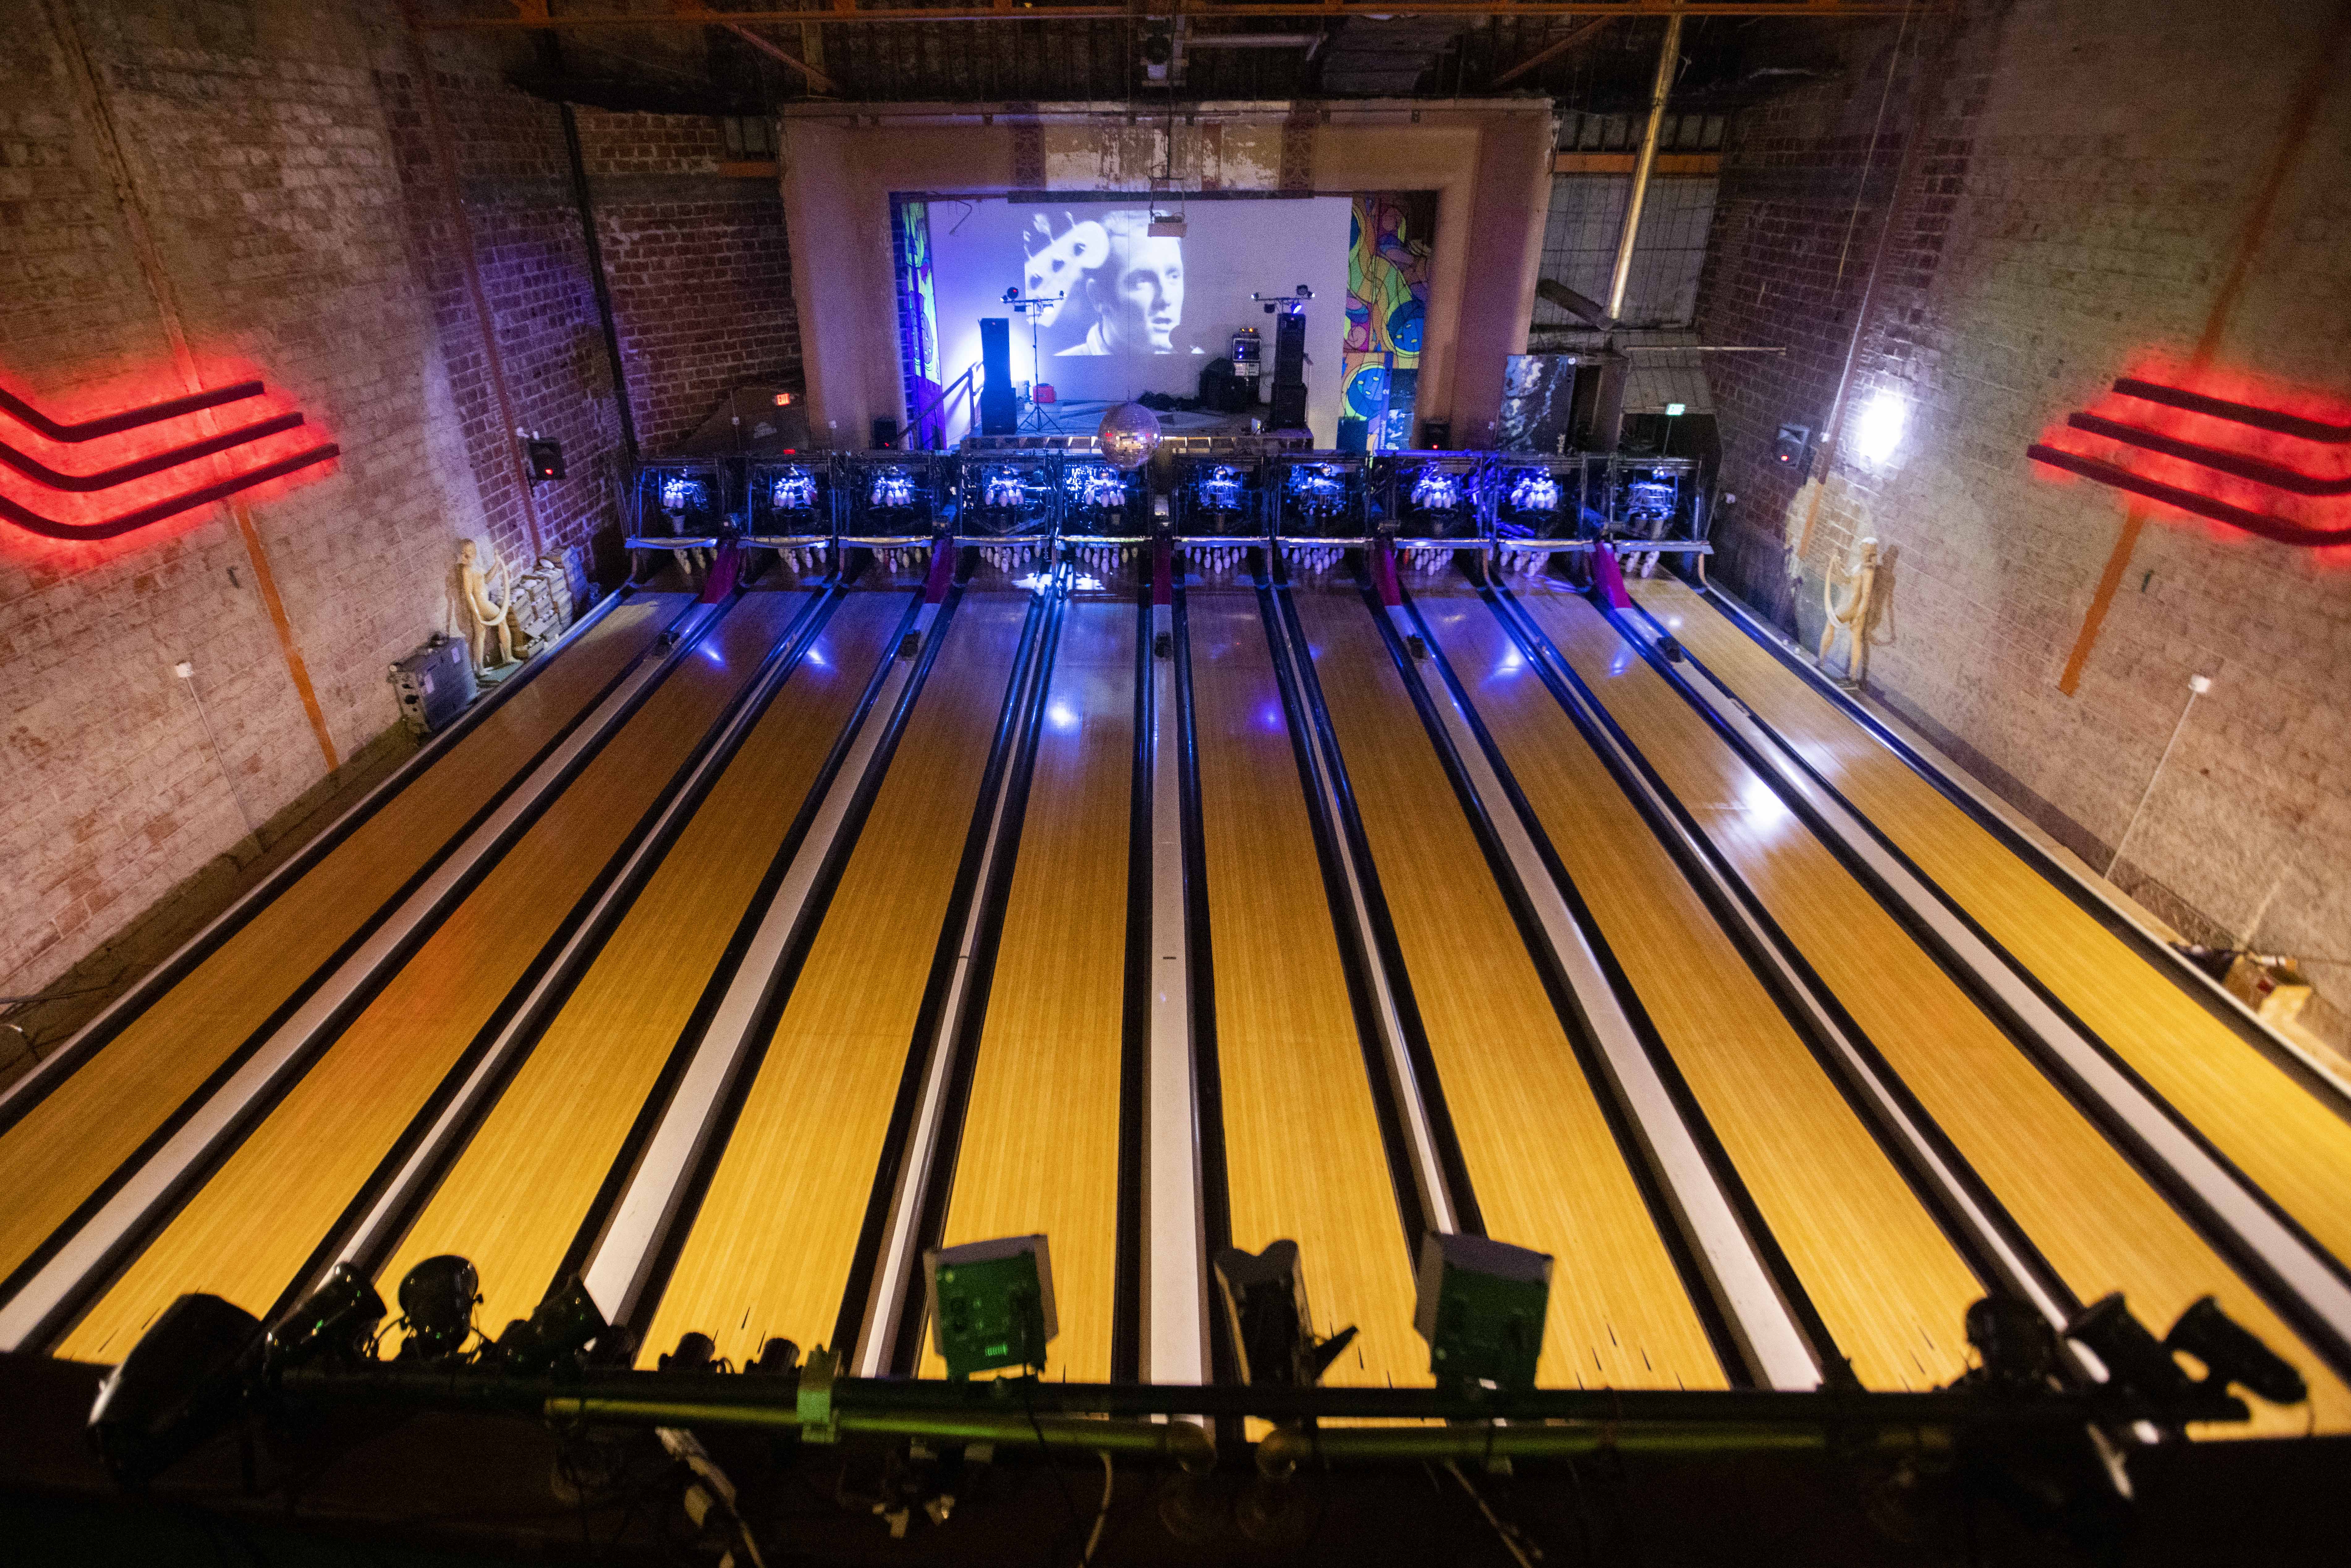 Dallas most intriguing new music venue is a bowling alley